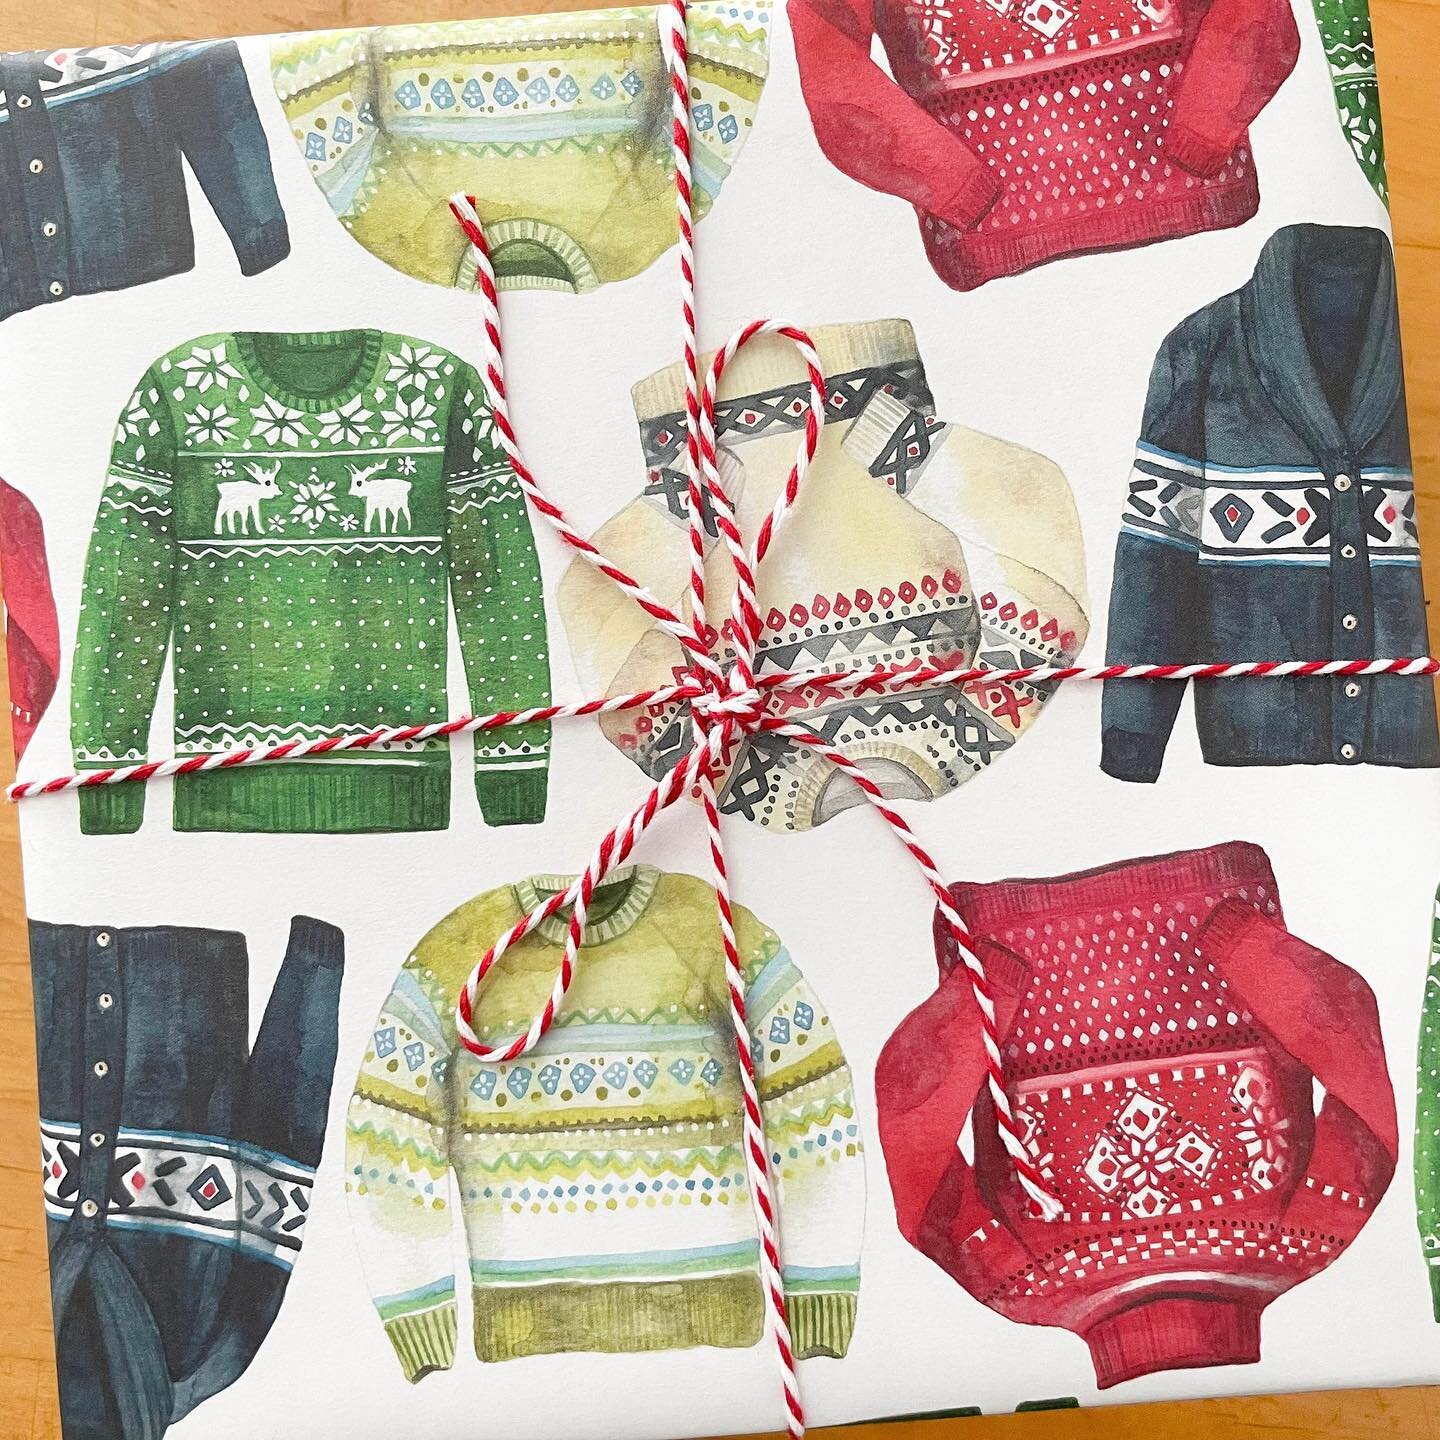 Kick off your holiday shopping weekend today by using code HOLIDAY23 on my website for 20% off all gift wraps, gift tags, cards, and art prints! Valid today through Sunday. This cute holiday sweater gift wrap is available, plus lots of other festive 